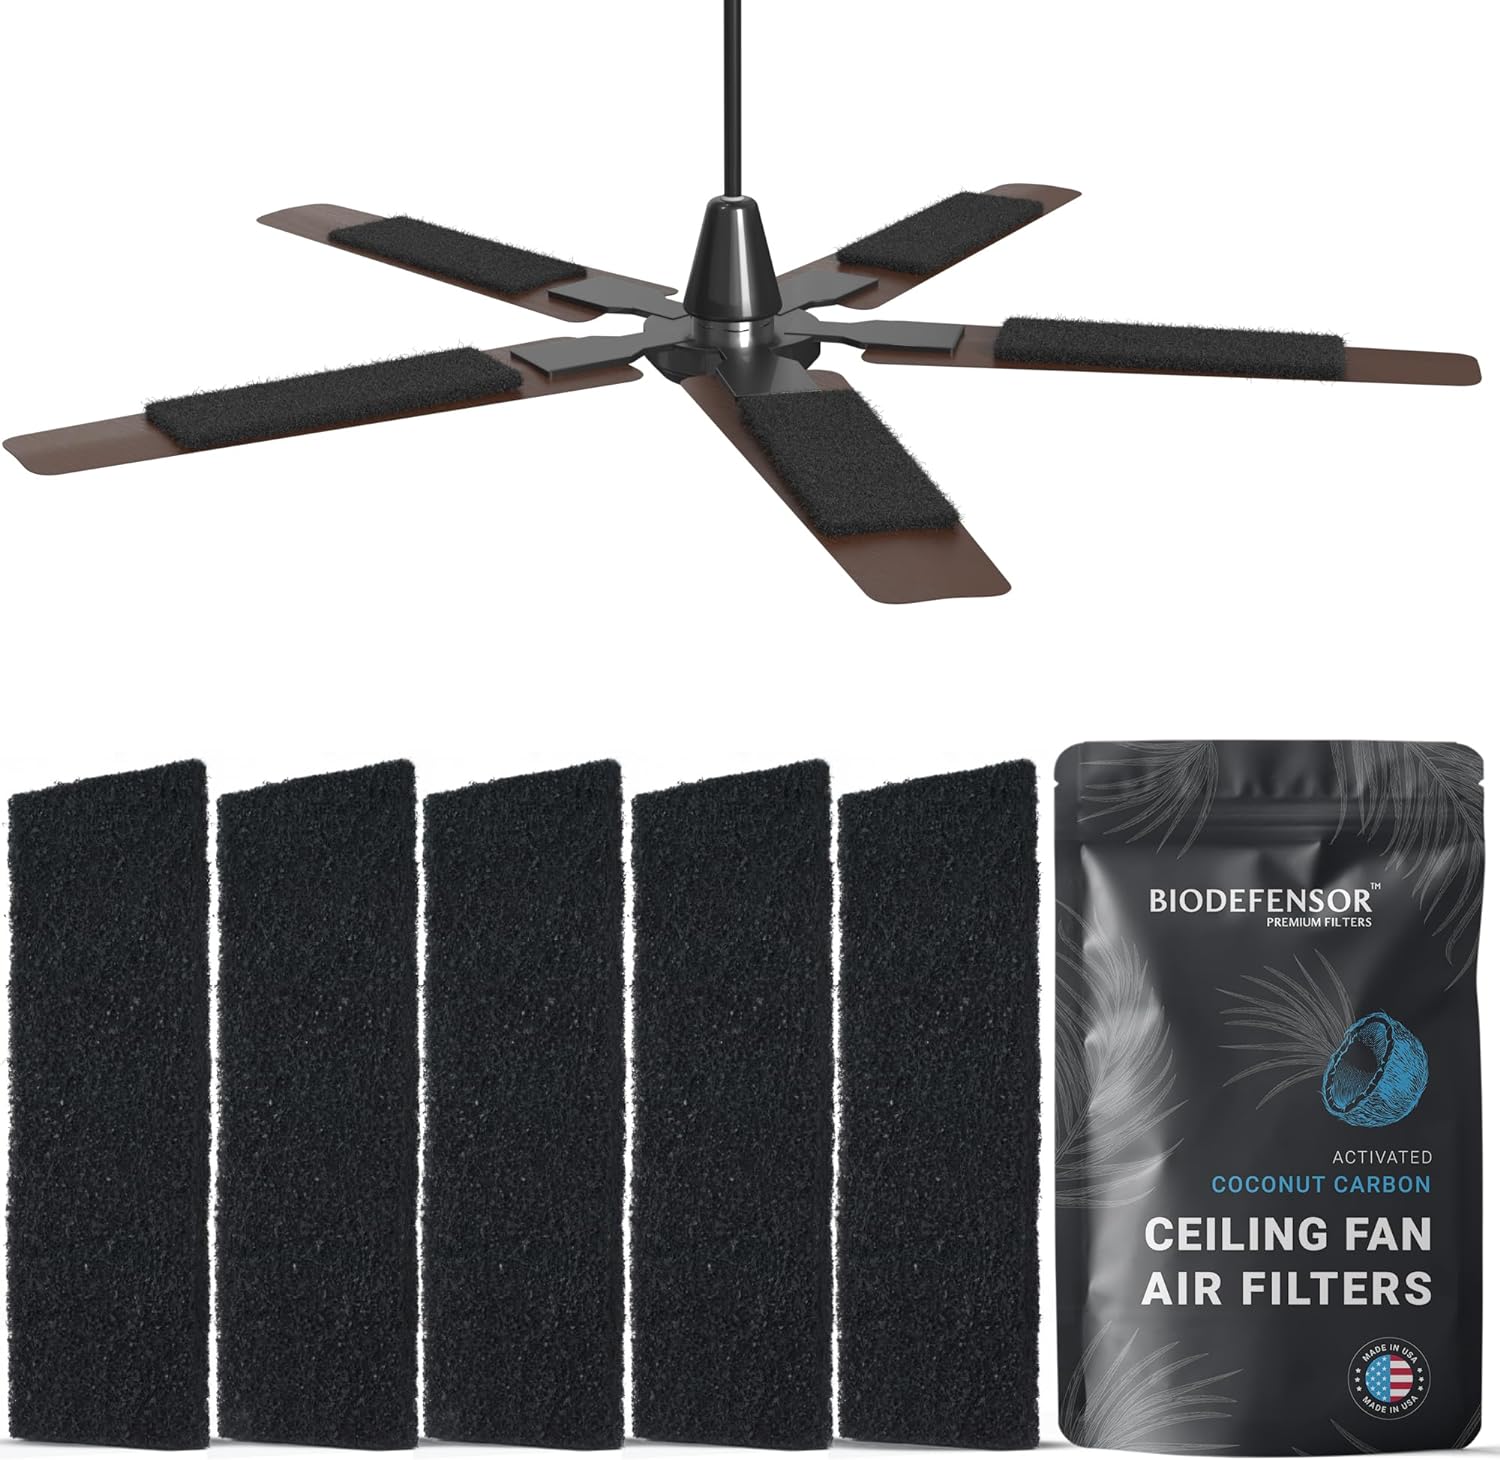 Ceiling Fan Filters, Made in USA, Easy Peel & Stick, Fits All Blade Types, Premium Granular Activated Carbon - Captures Dust, Odors, VOCs, Airborne Irritant Purifier (5-Pack for 5-Blade)